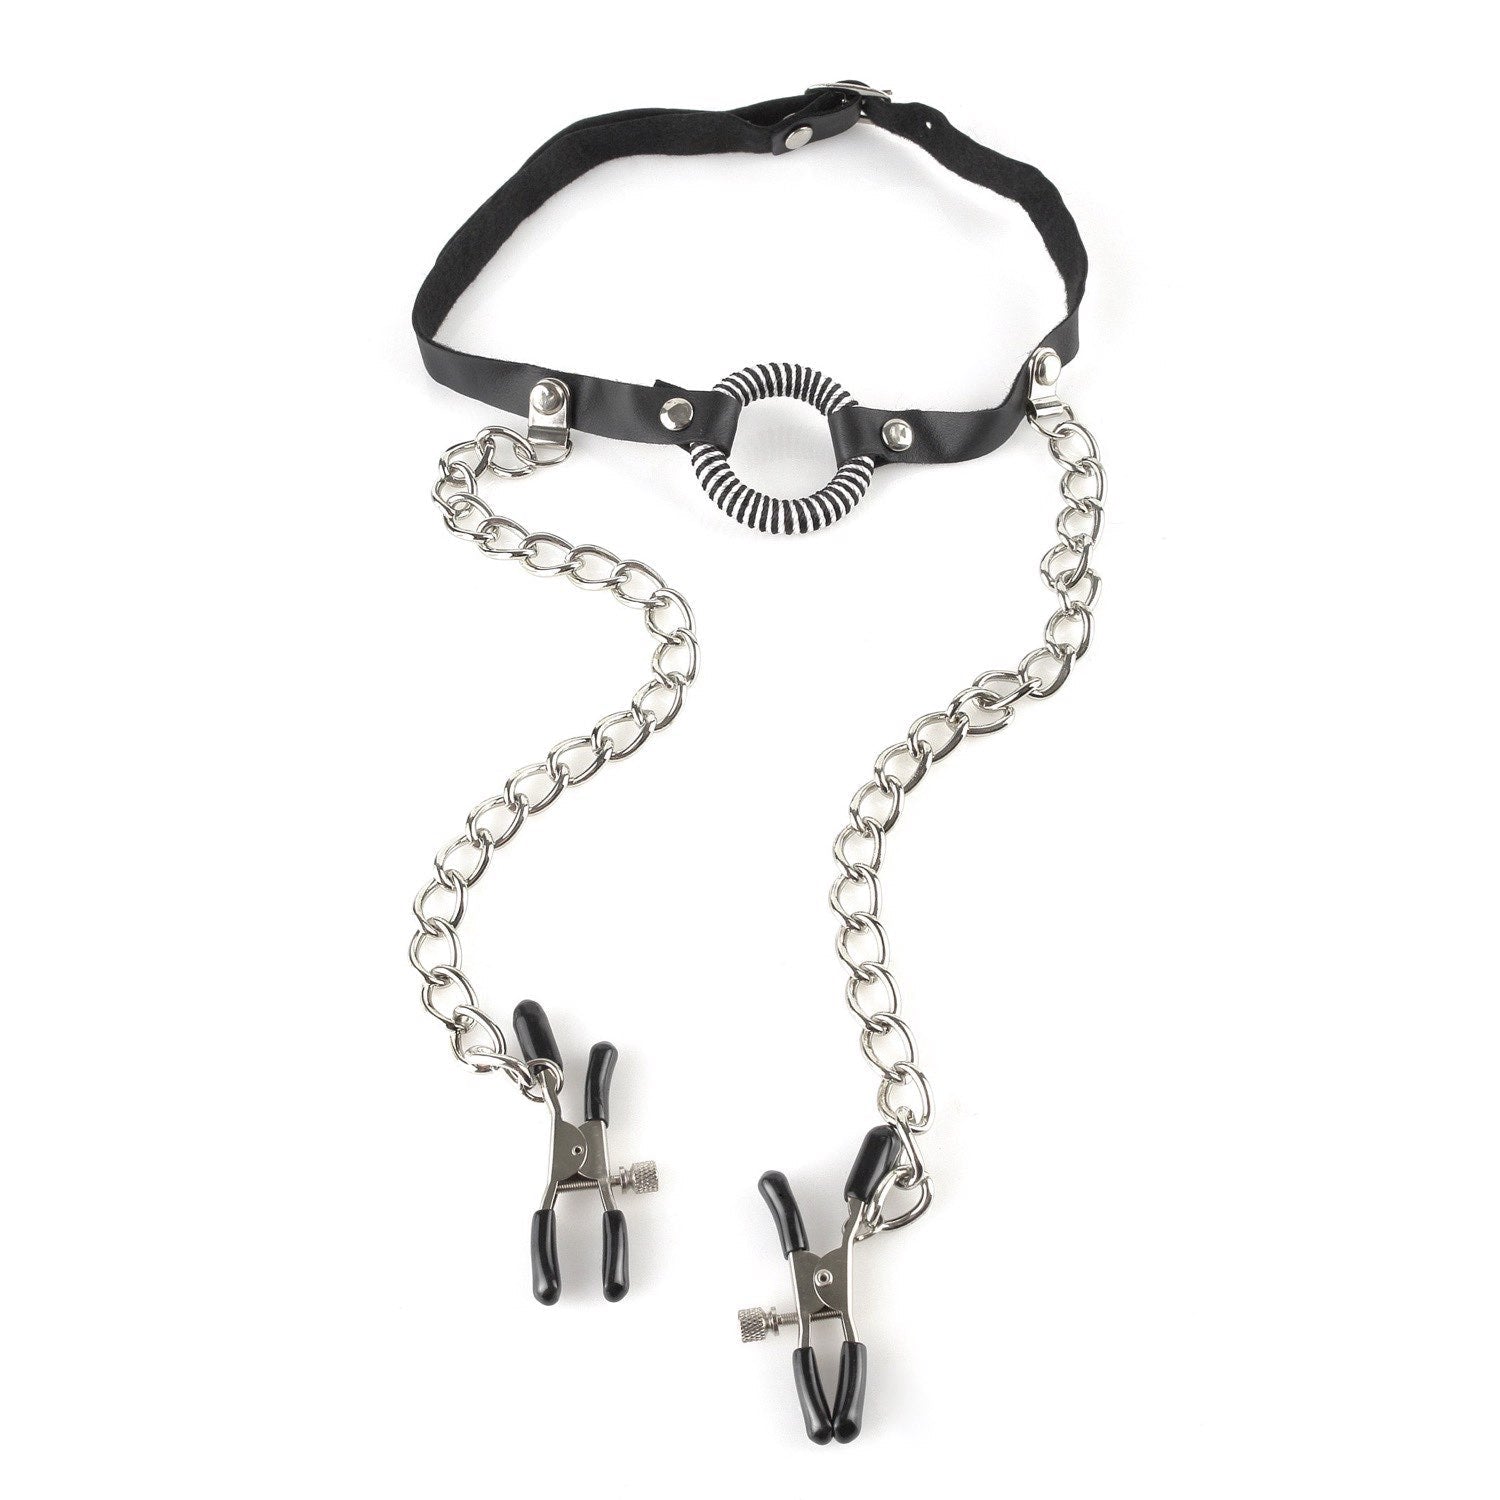 Fetish Fantasy Series O-ring Gag with Nipple Clamps - Body Restraints by Pipedream